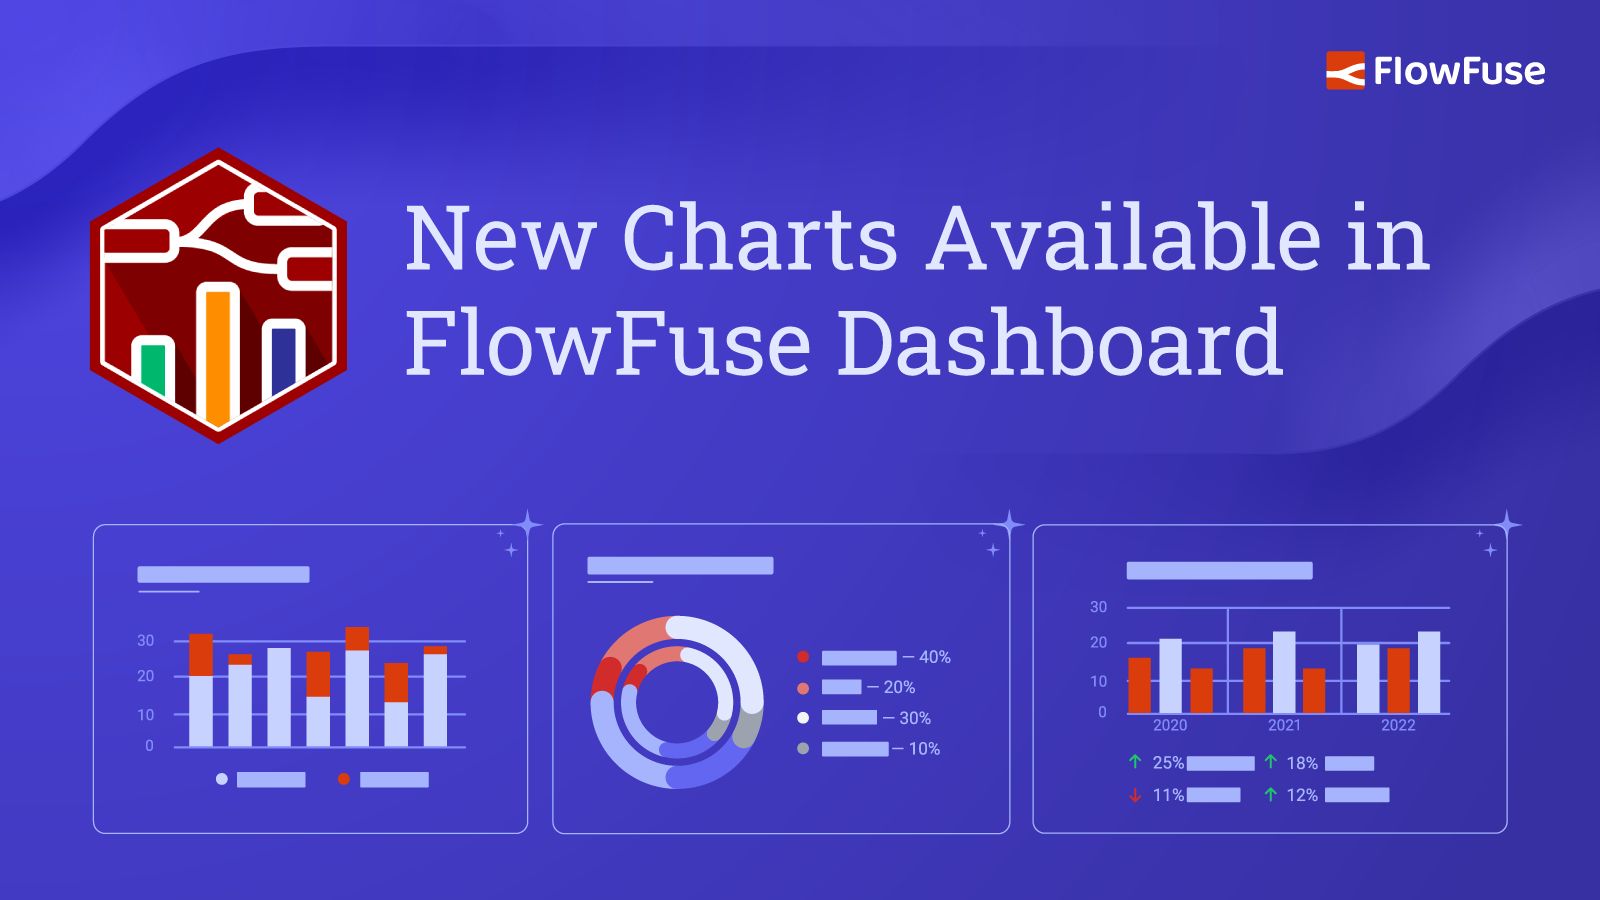 Image representing New Charts Available in FlowFuse Dashboard